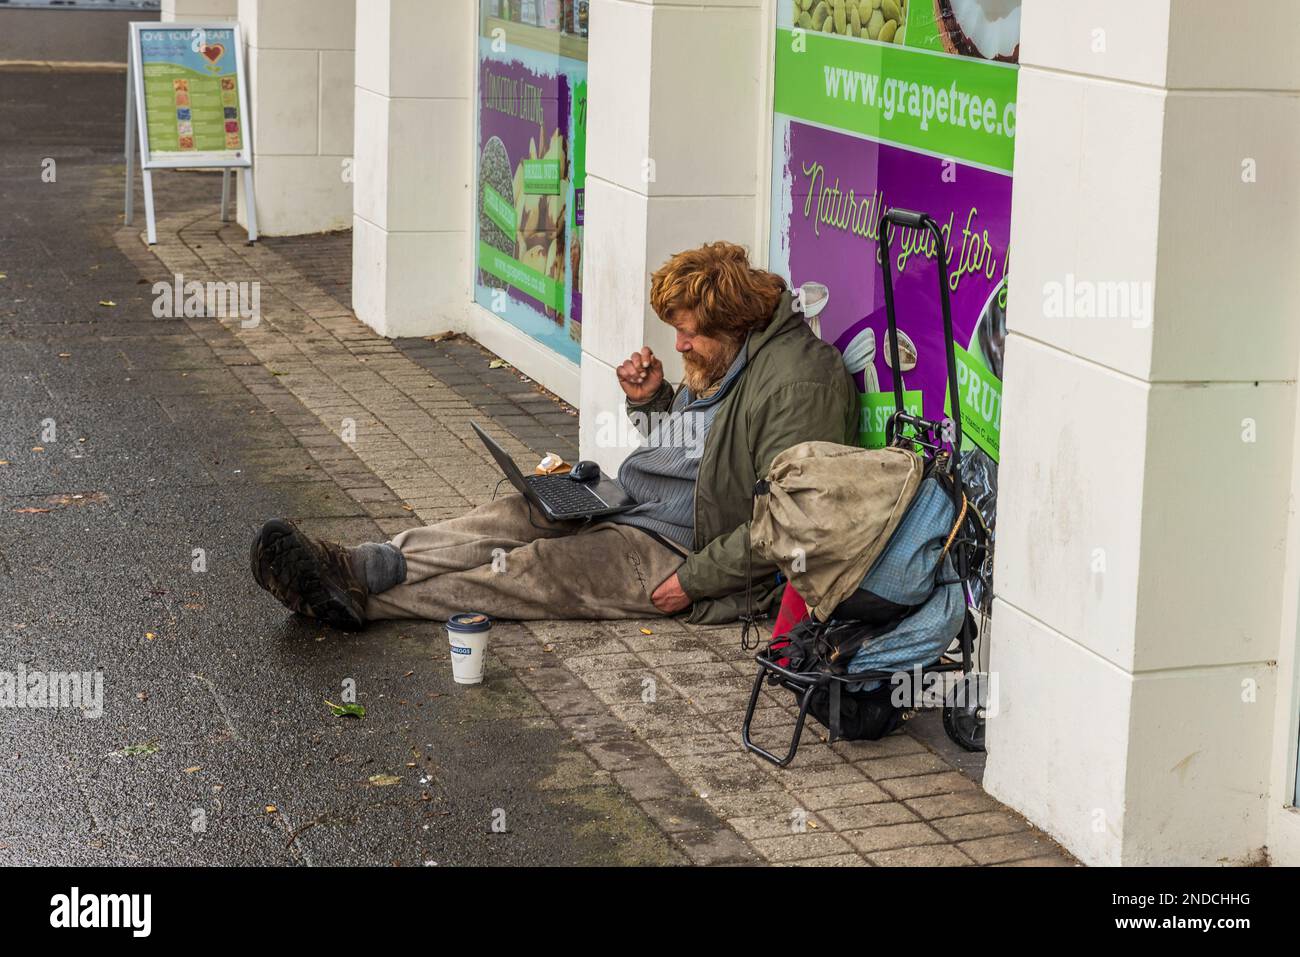 Homeless person sat on the floor with a laptop Stock Photo